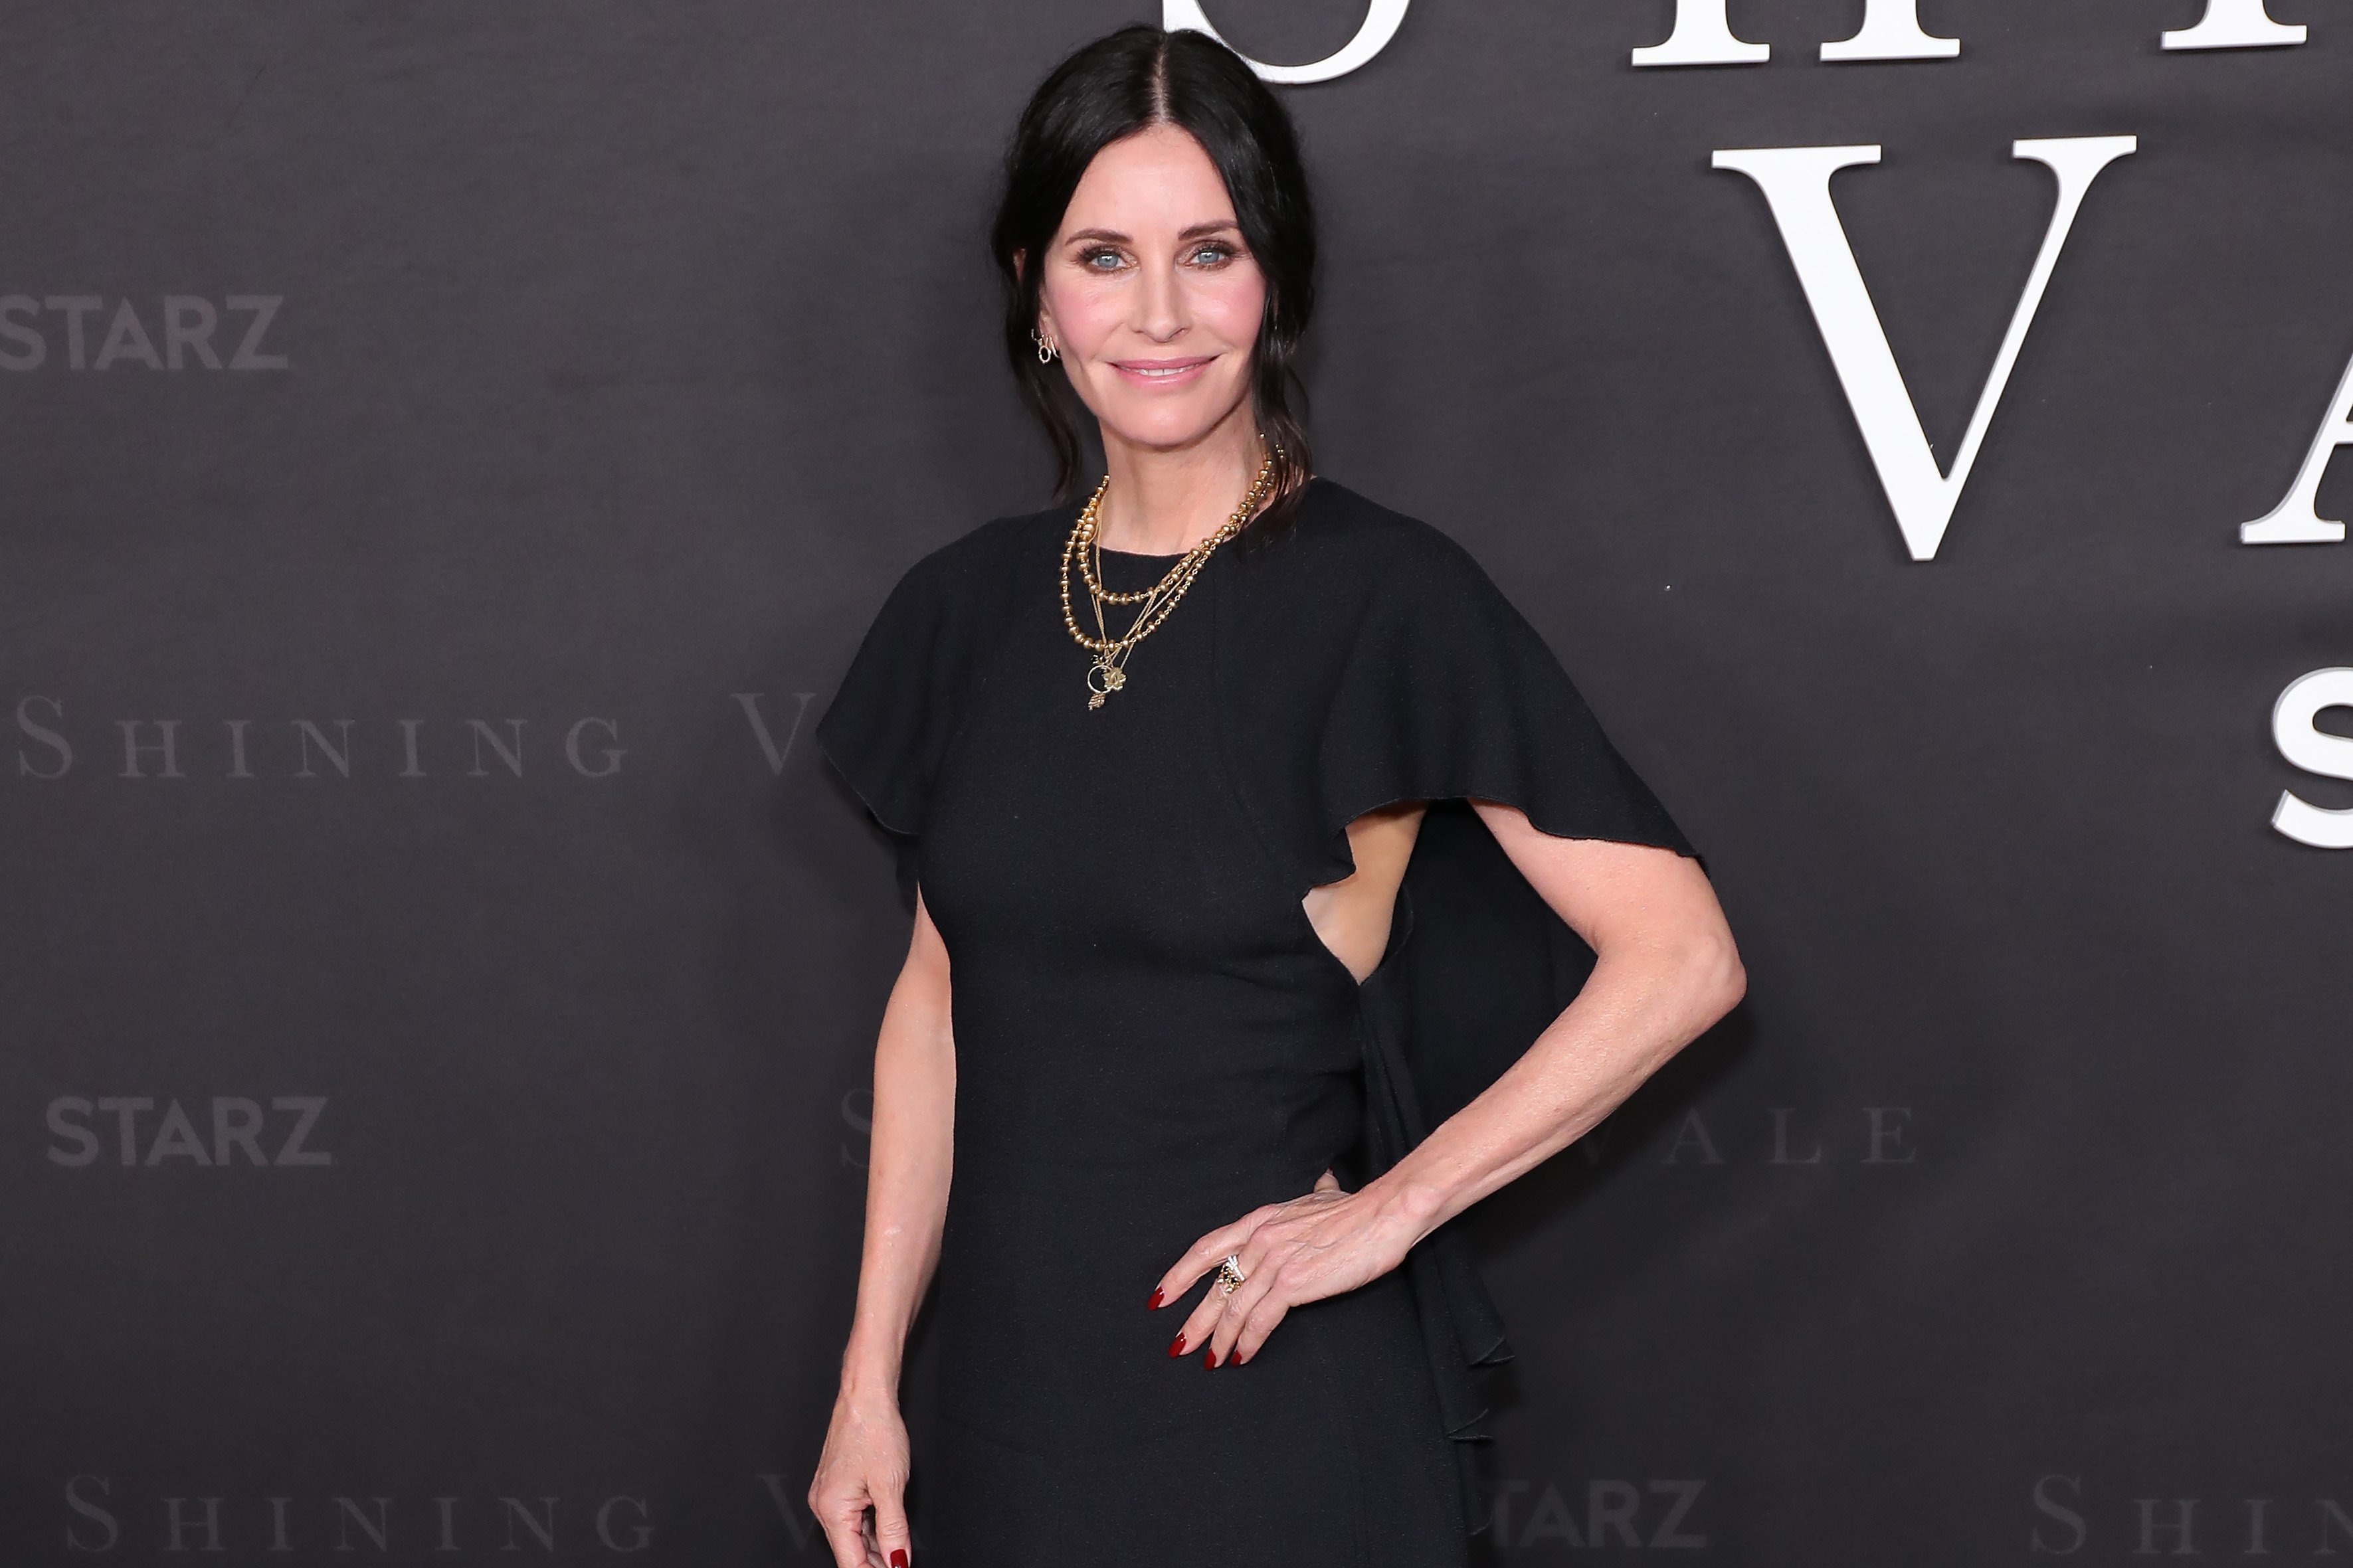 Courteney Cox poses for a photo with one hand on her hip at the premiere of 'Shining Vale'